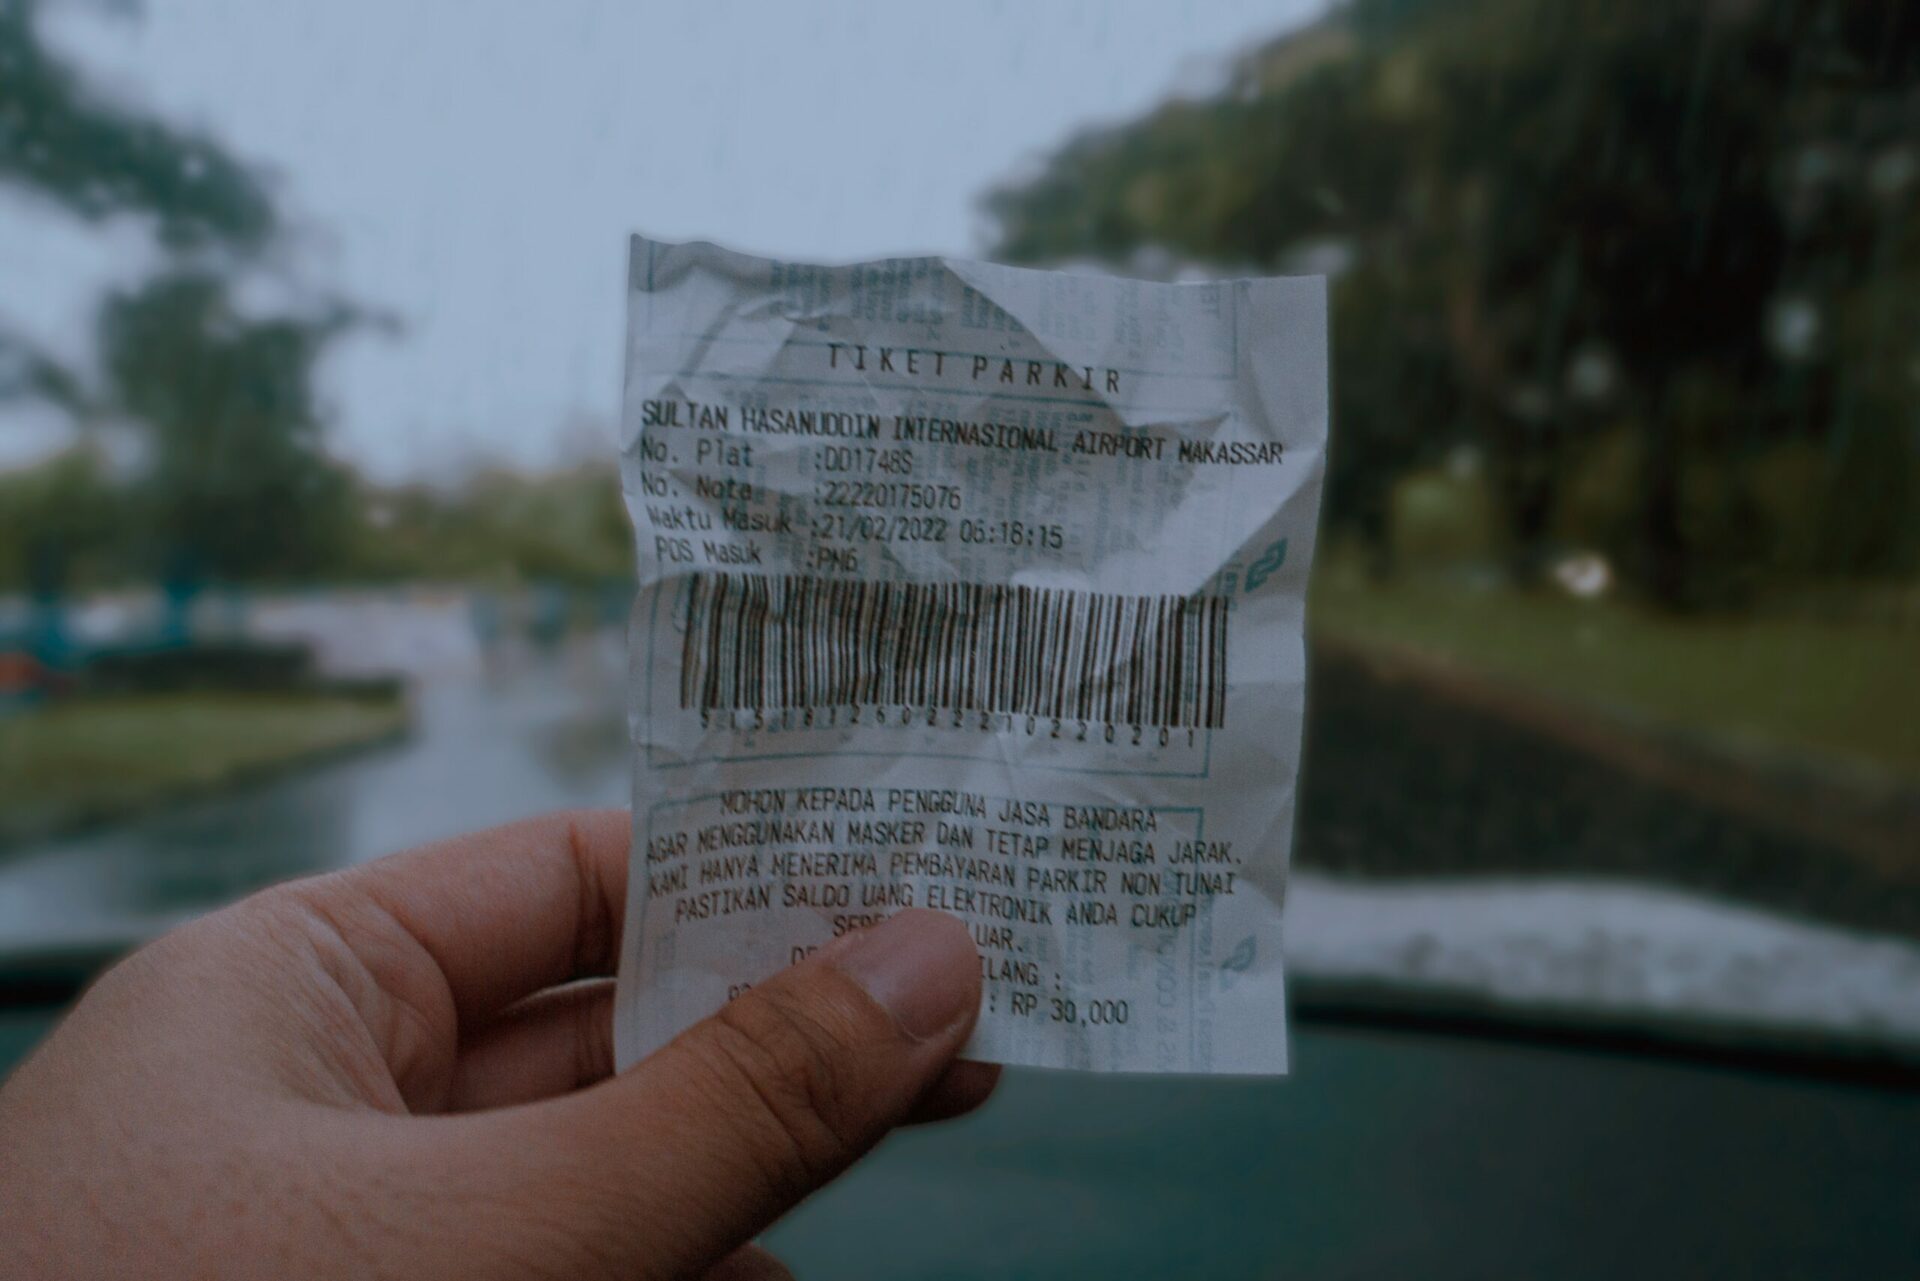 Are Receipts recyclable?: How to Make Environmentally Responsible Choices